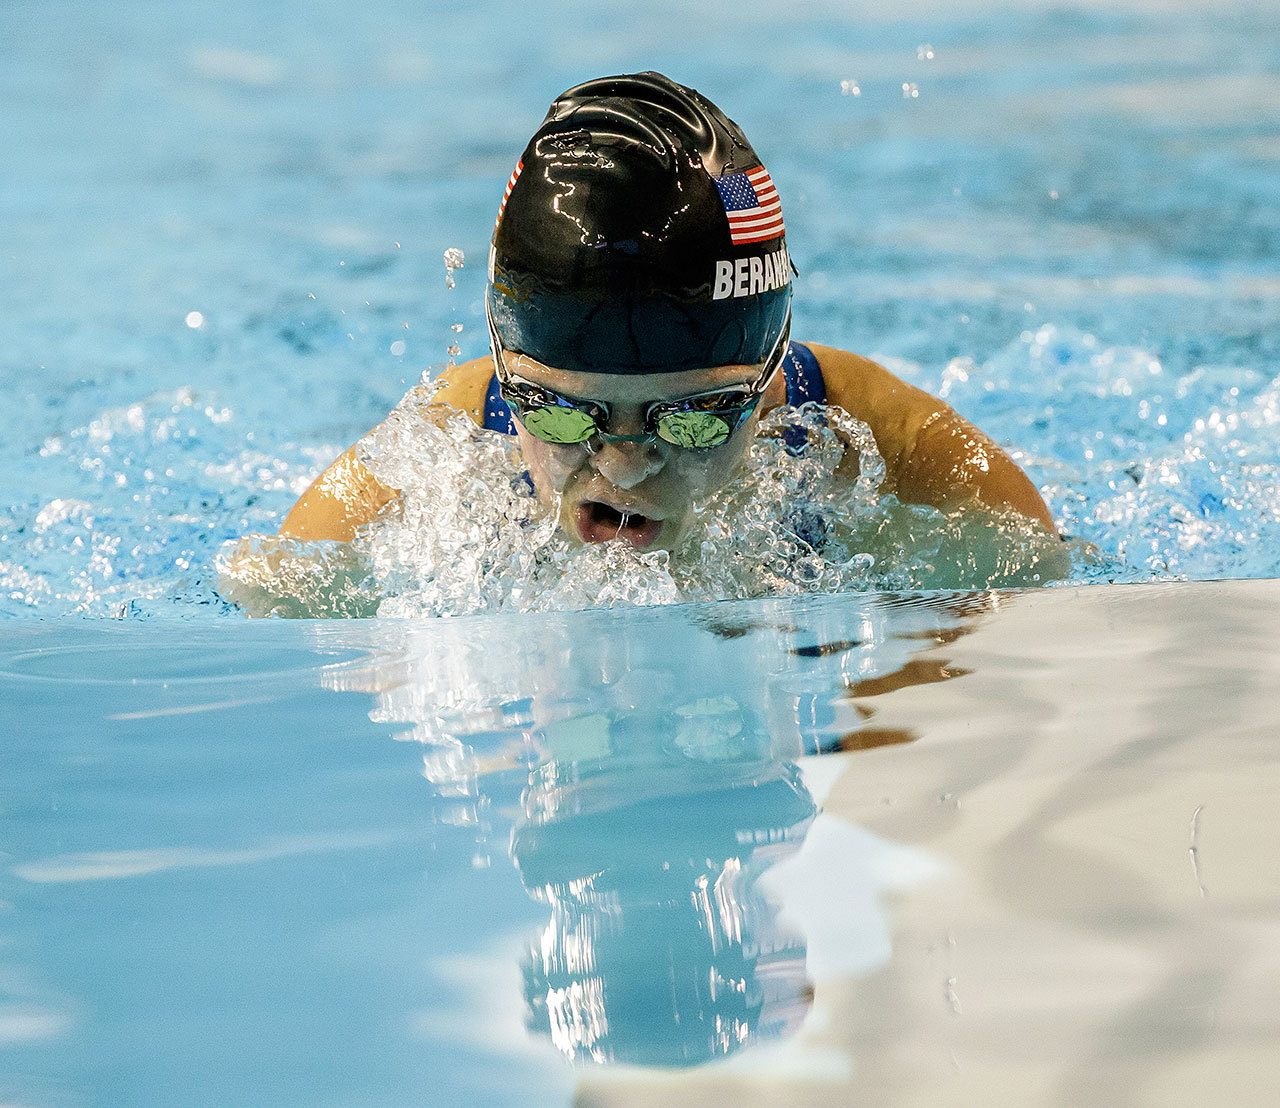 Haley Beranbaum of Snohomish competes in the 100-meter breaststroke at the 2015 Parapan American Games in Toronto. Beranbaum won a silver medal in the event. (Photo by Joe Kusumoto)